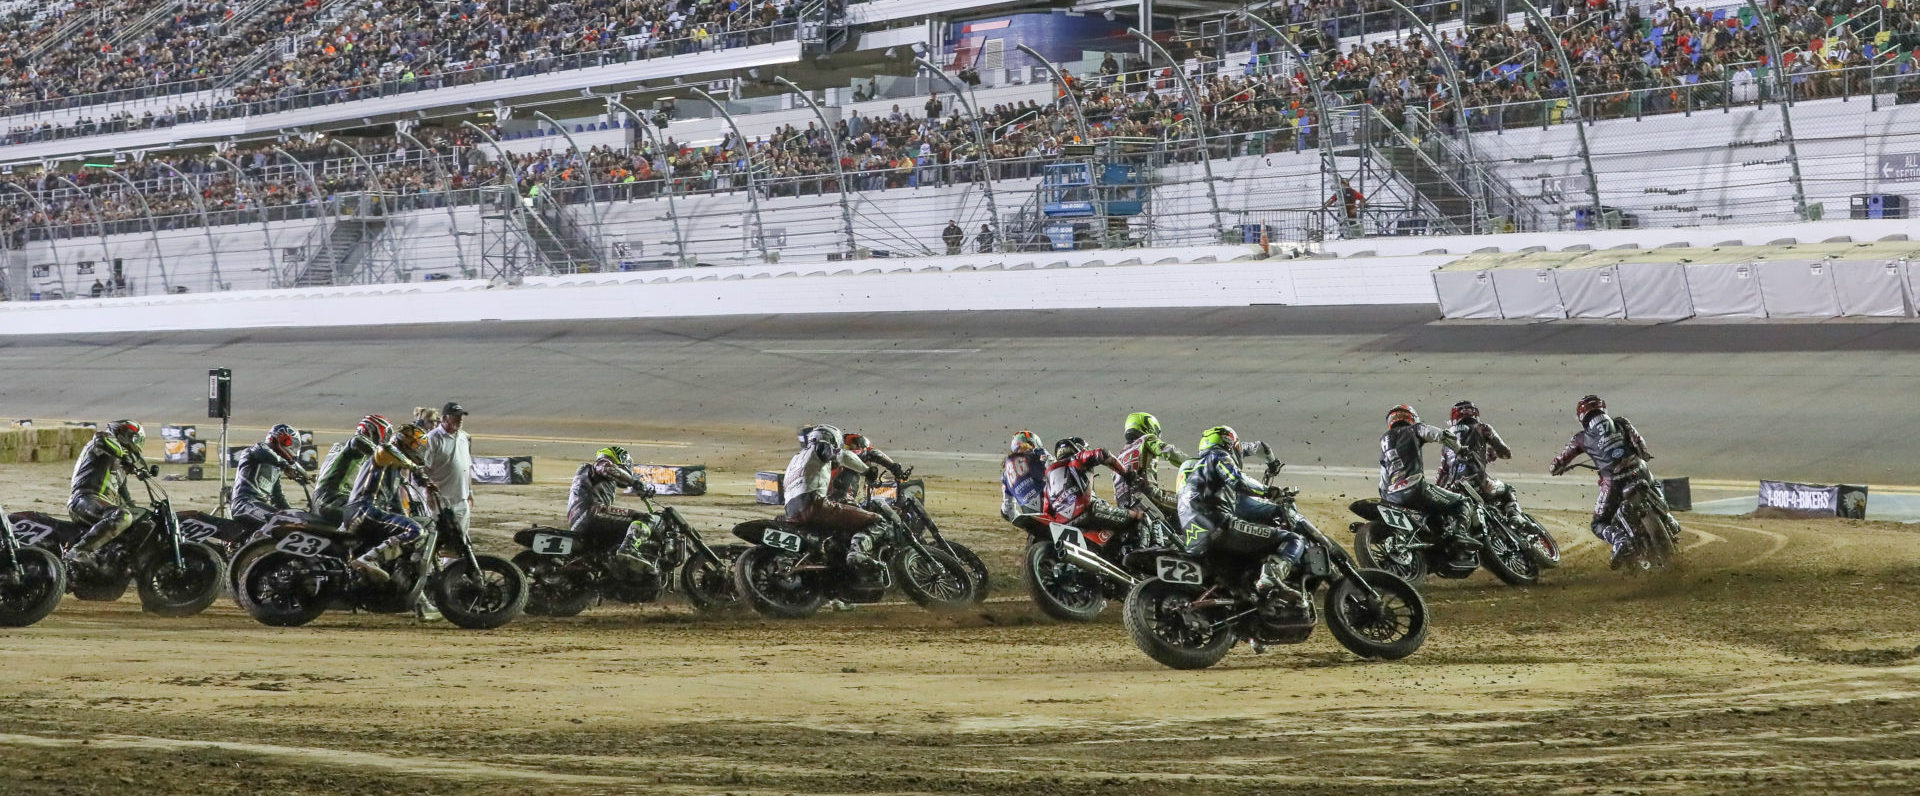 The upcoming Atlanta Super TT at Atlanta Motor Speedway will have a multi-surface track, like the 2019 Daytona TT pictured here. Photo by Brian J. Nelson.